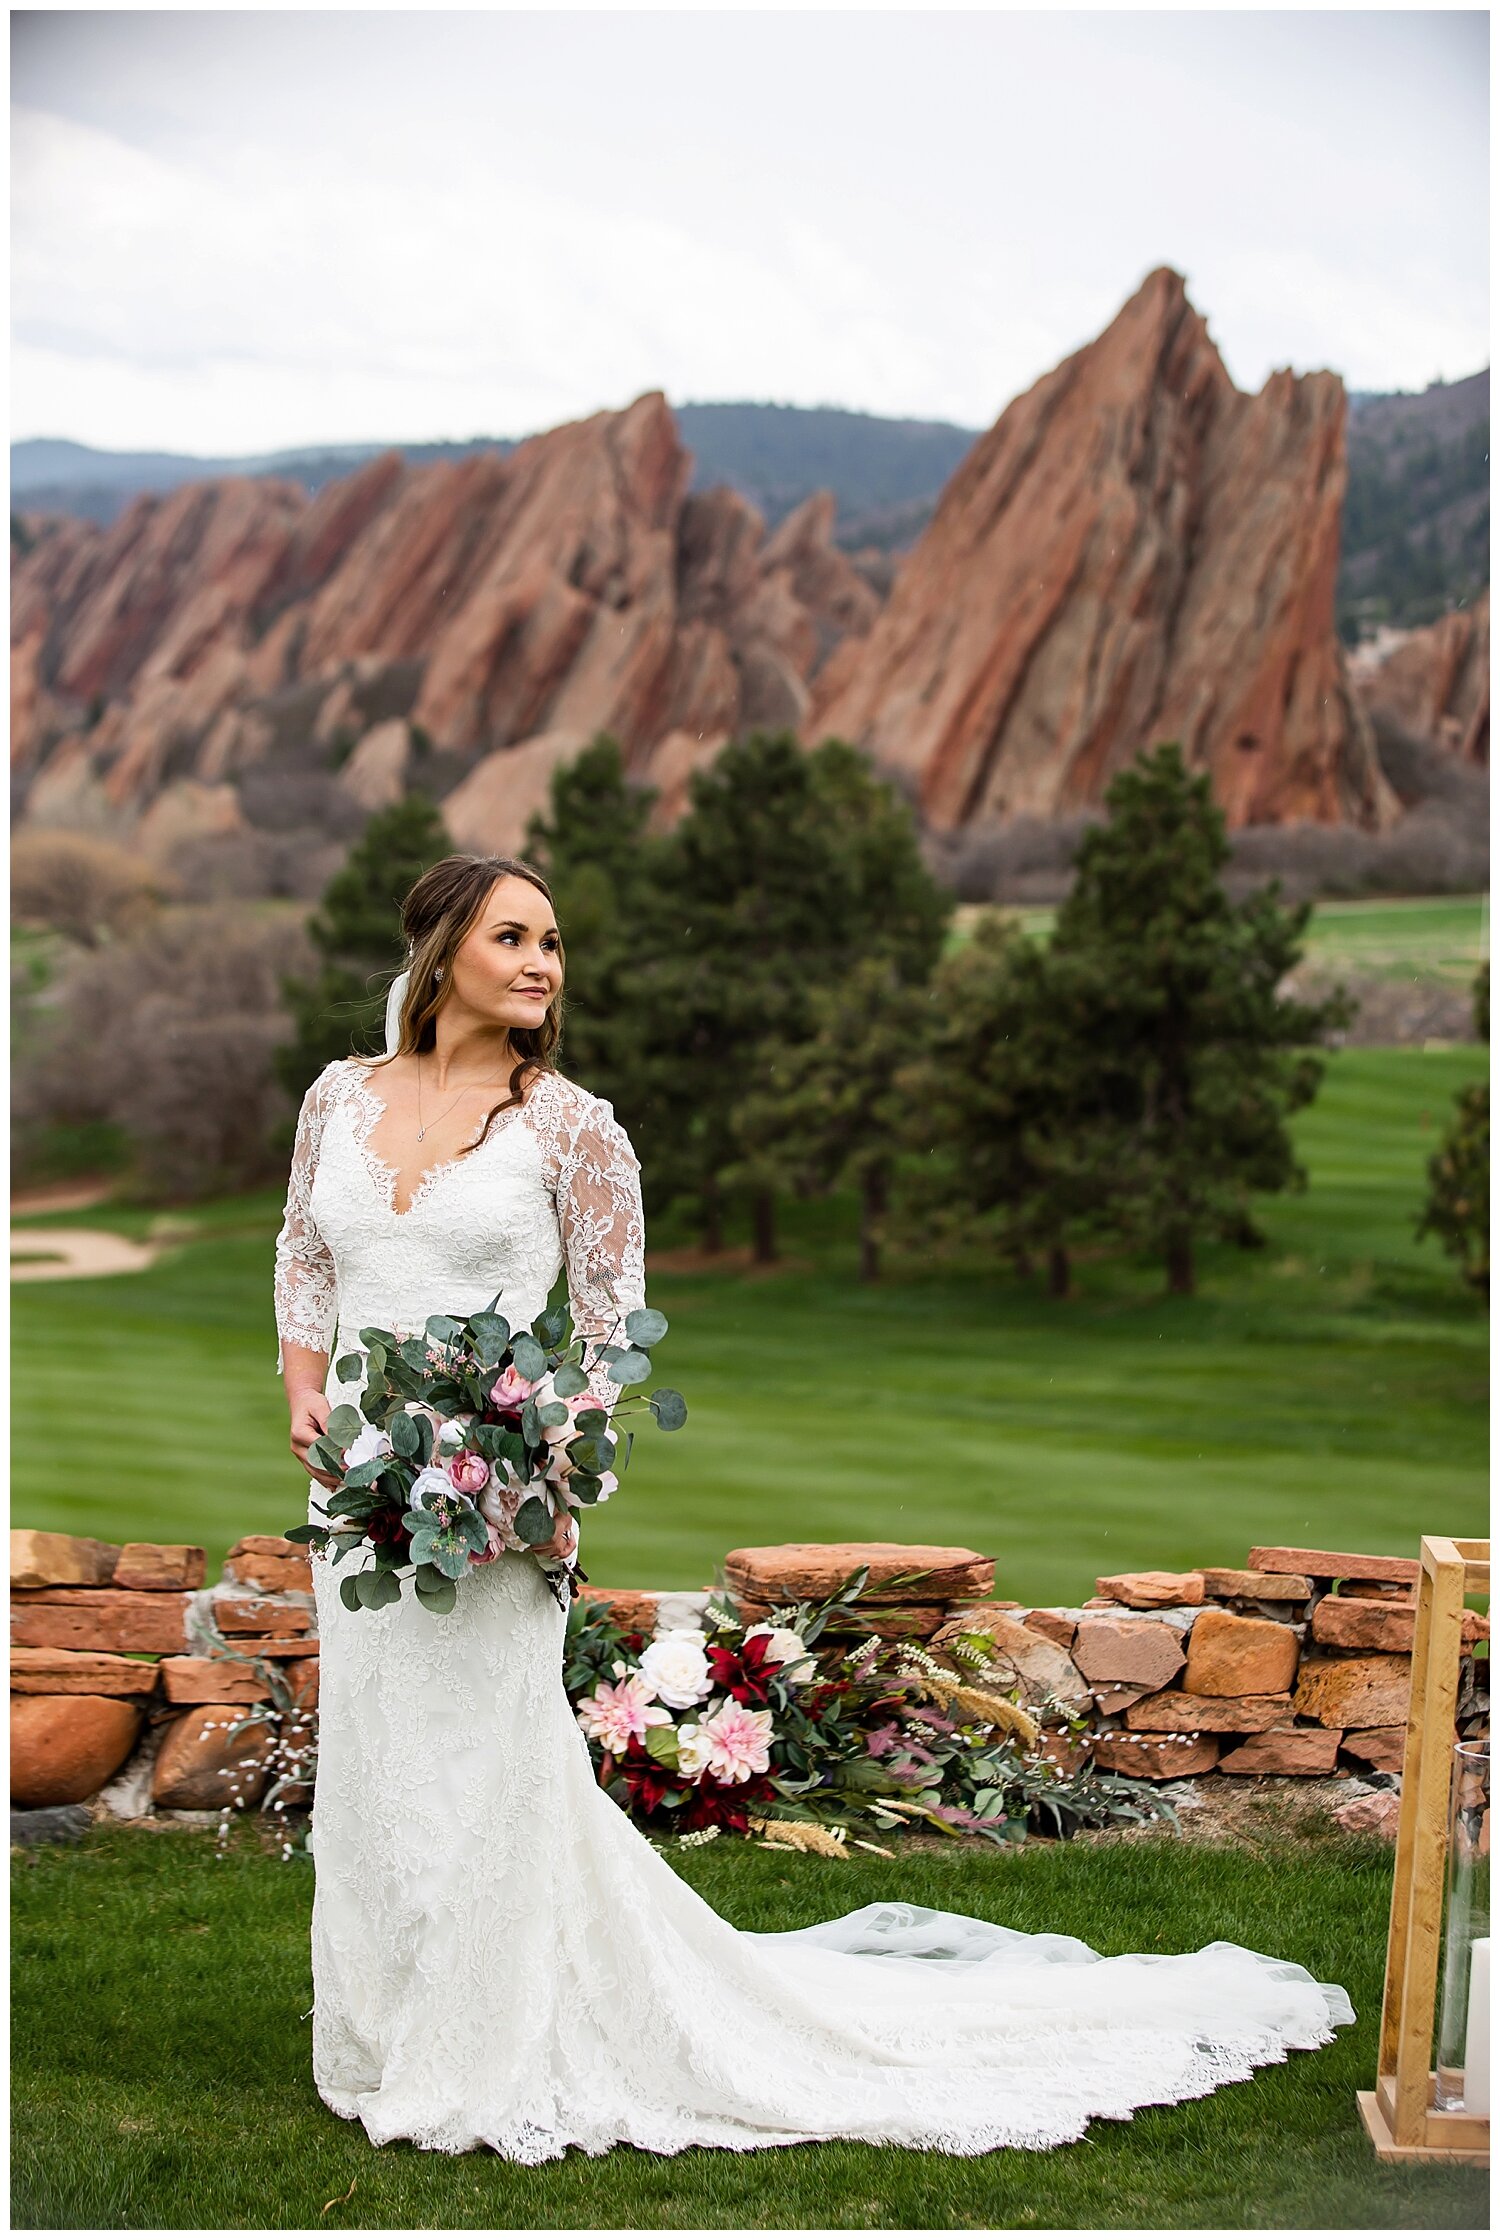 Molly and Nick's Wedding Day|Arrowhead Golf Course Elopement_0053.jpg